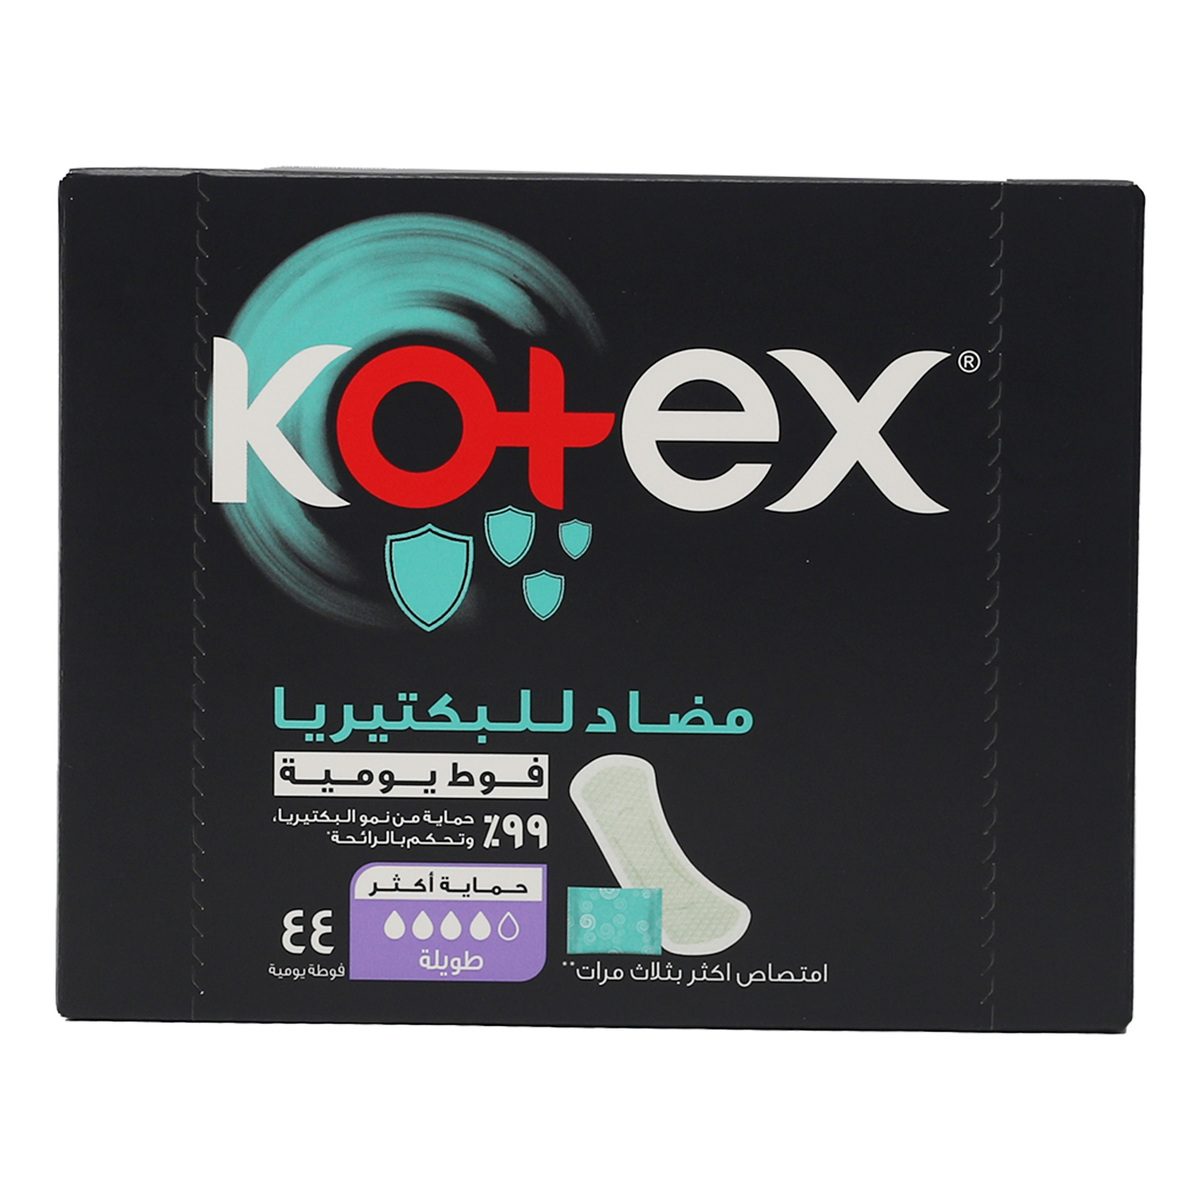 Kotex Antibacterial Panty Liners 99% Protection from Bacteria Growth Long Size 44 pcs